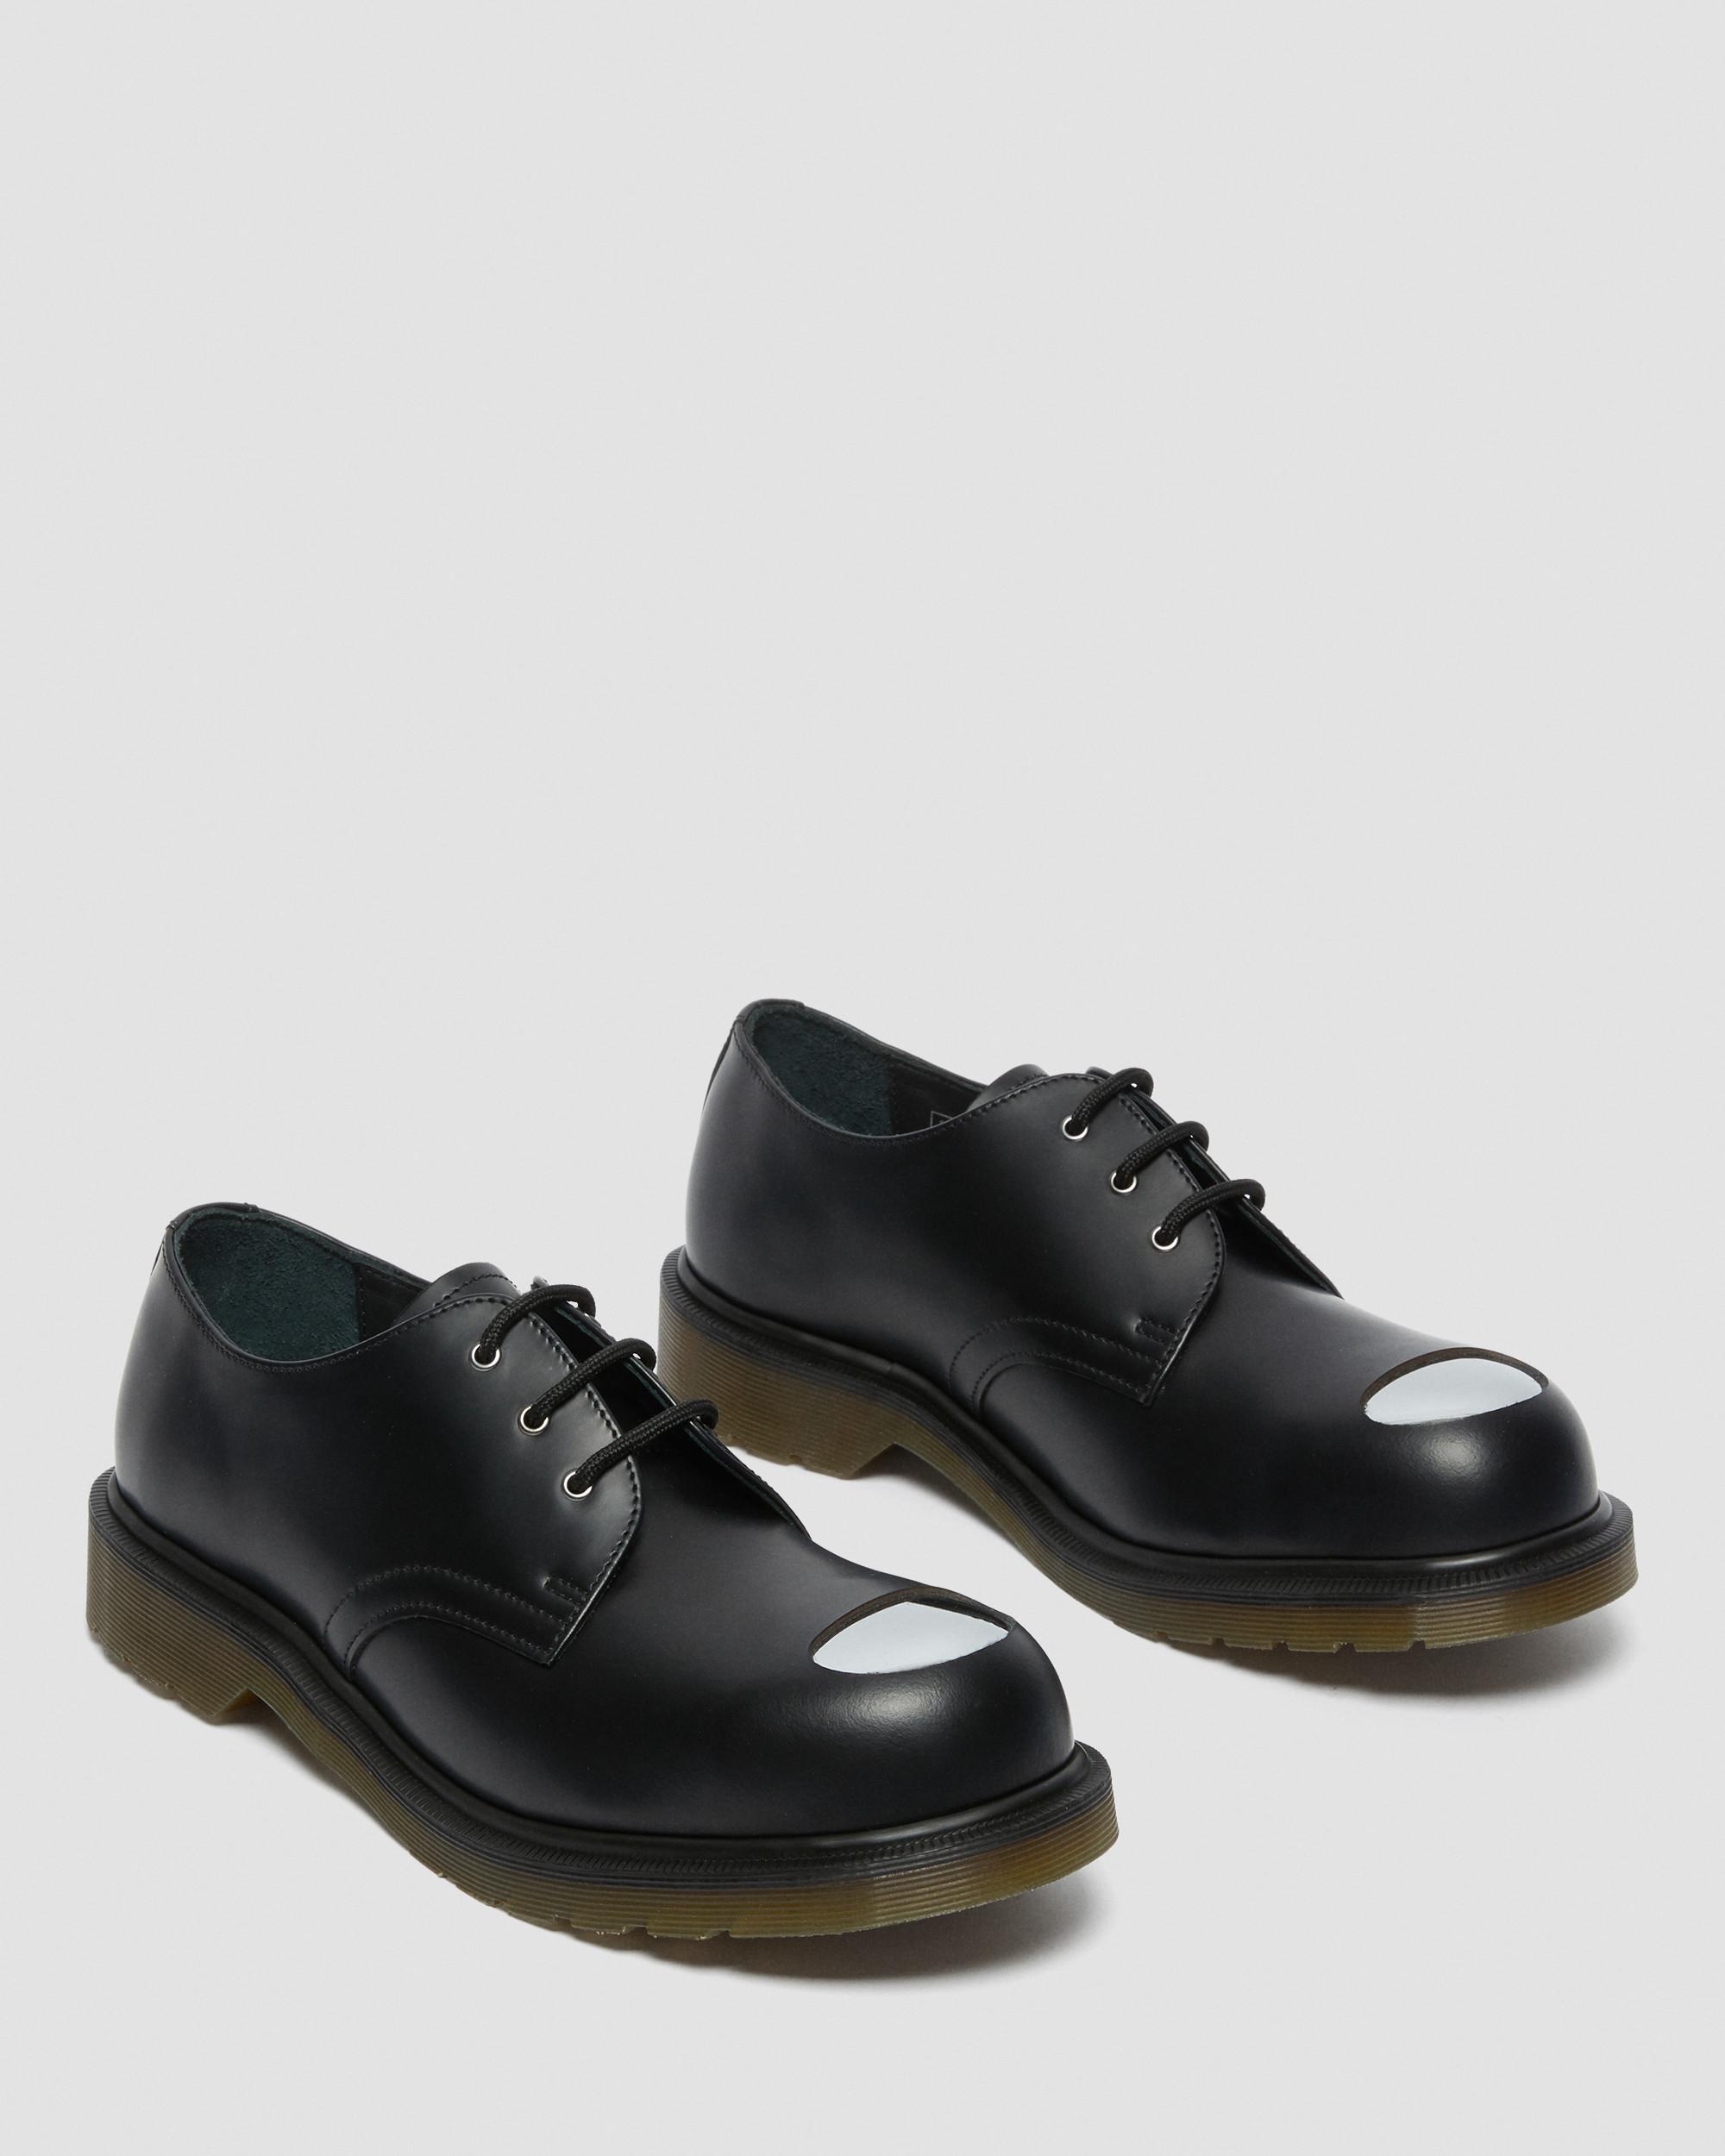 1925 Exposed Steel Toe Leather Shoes | Dr. Martens